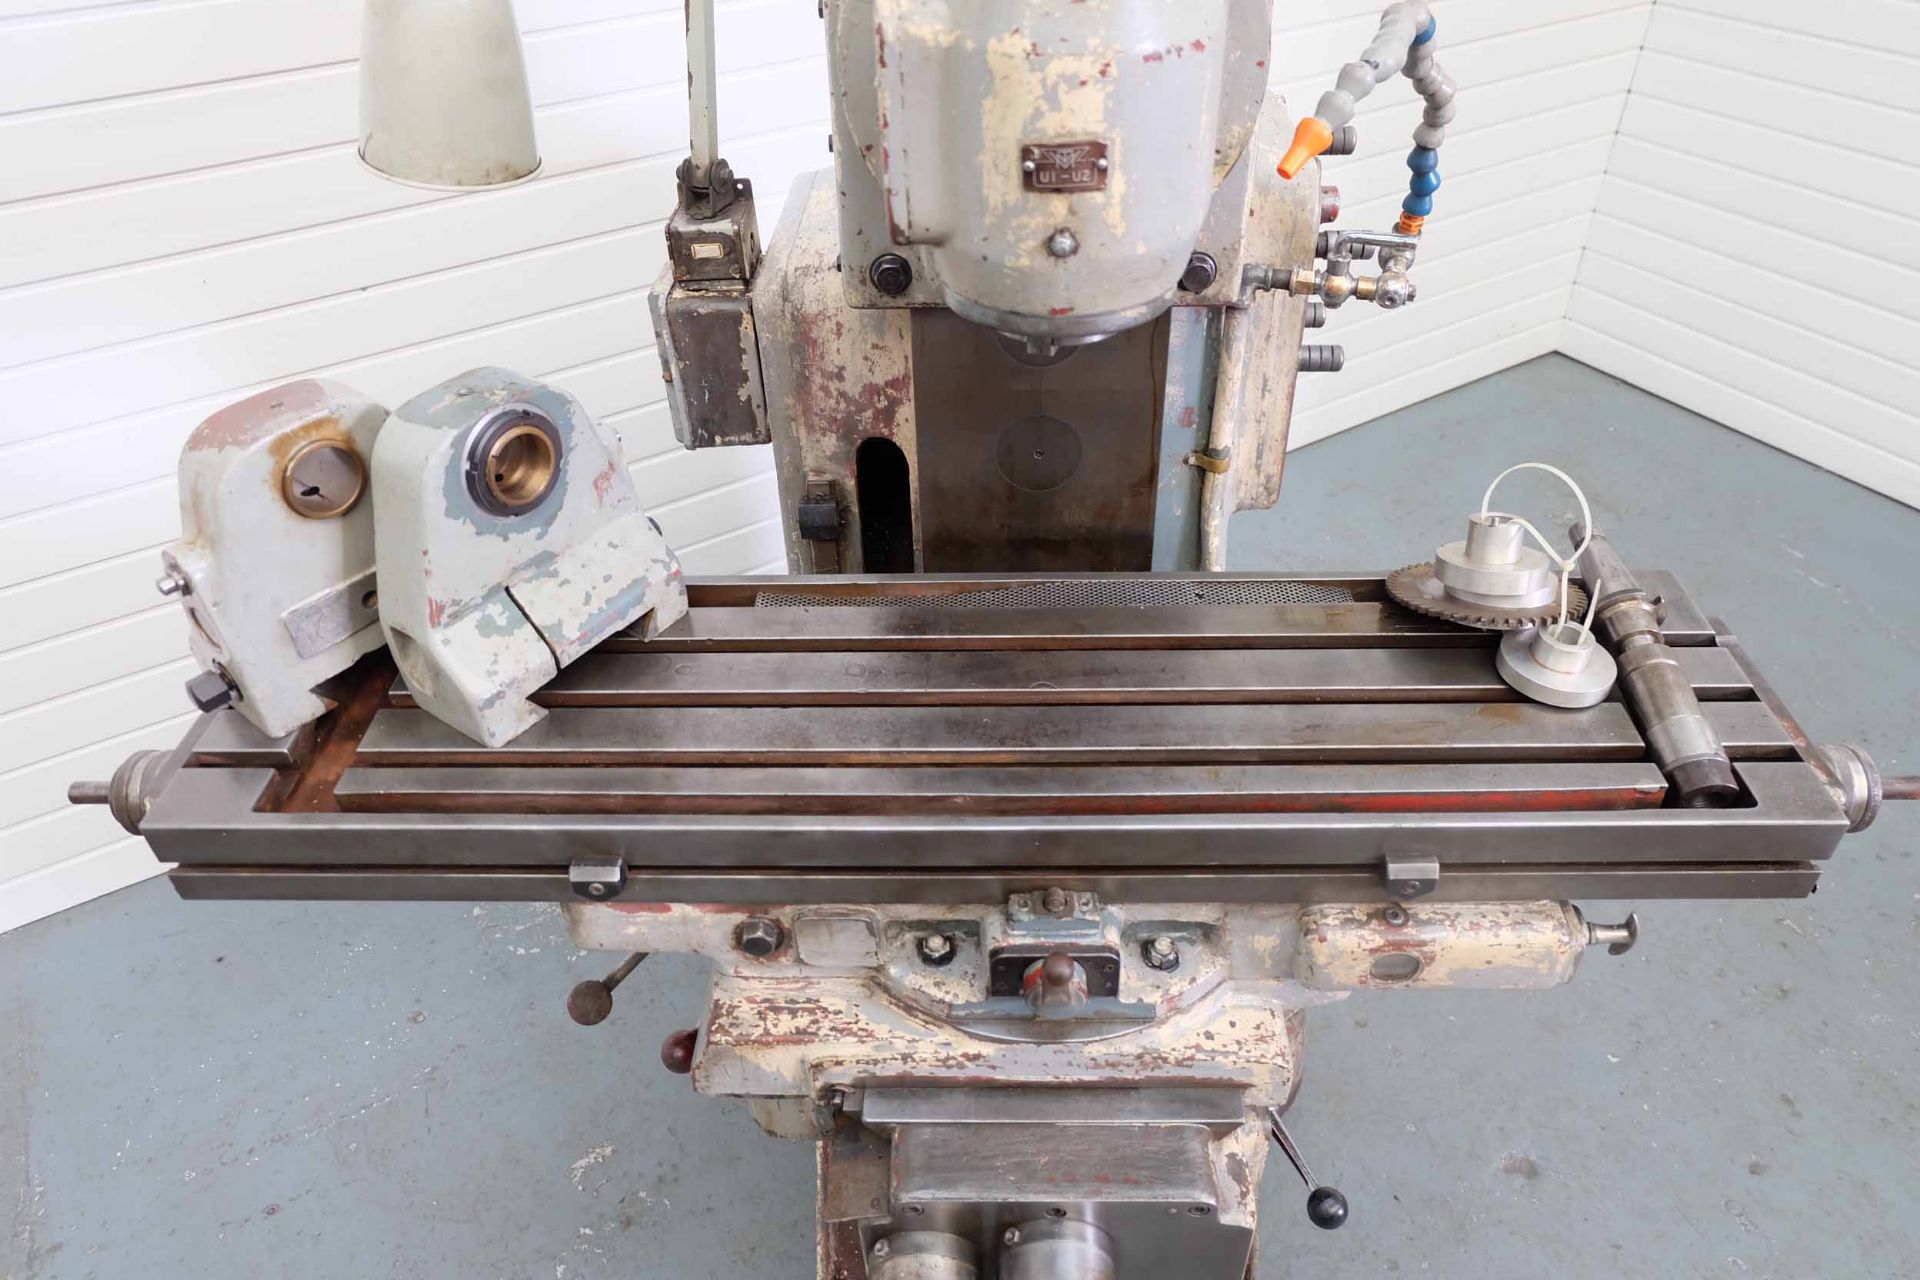 Elliott Victoria Model U2 Universal Milling Machine With Swivelling Vertical Head. Table Size 45" x - Image 7 of 12